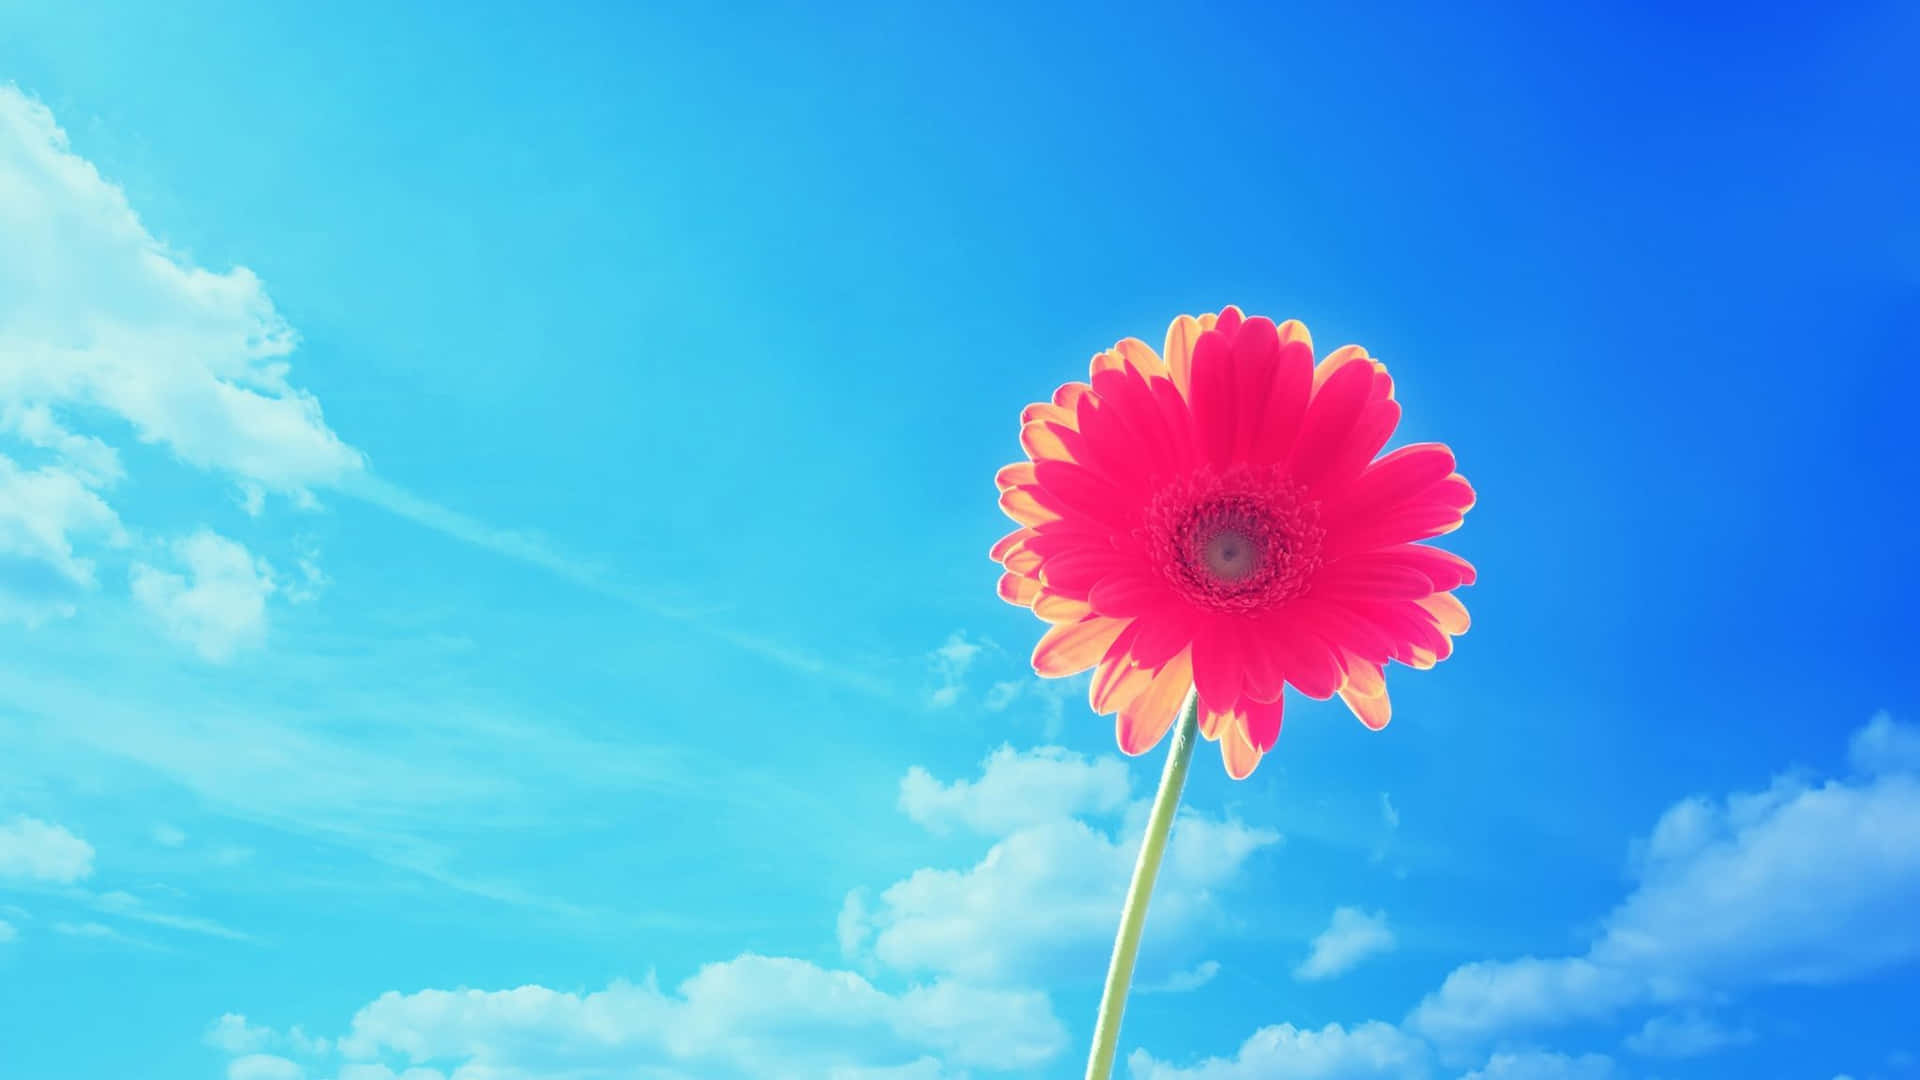 A Single Red Flower Is Standing In The Blue Sky Wallpaper